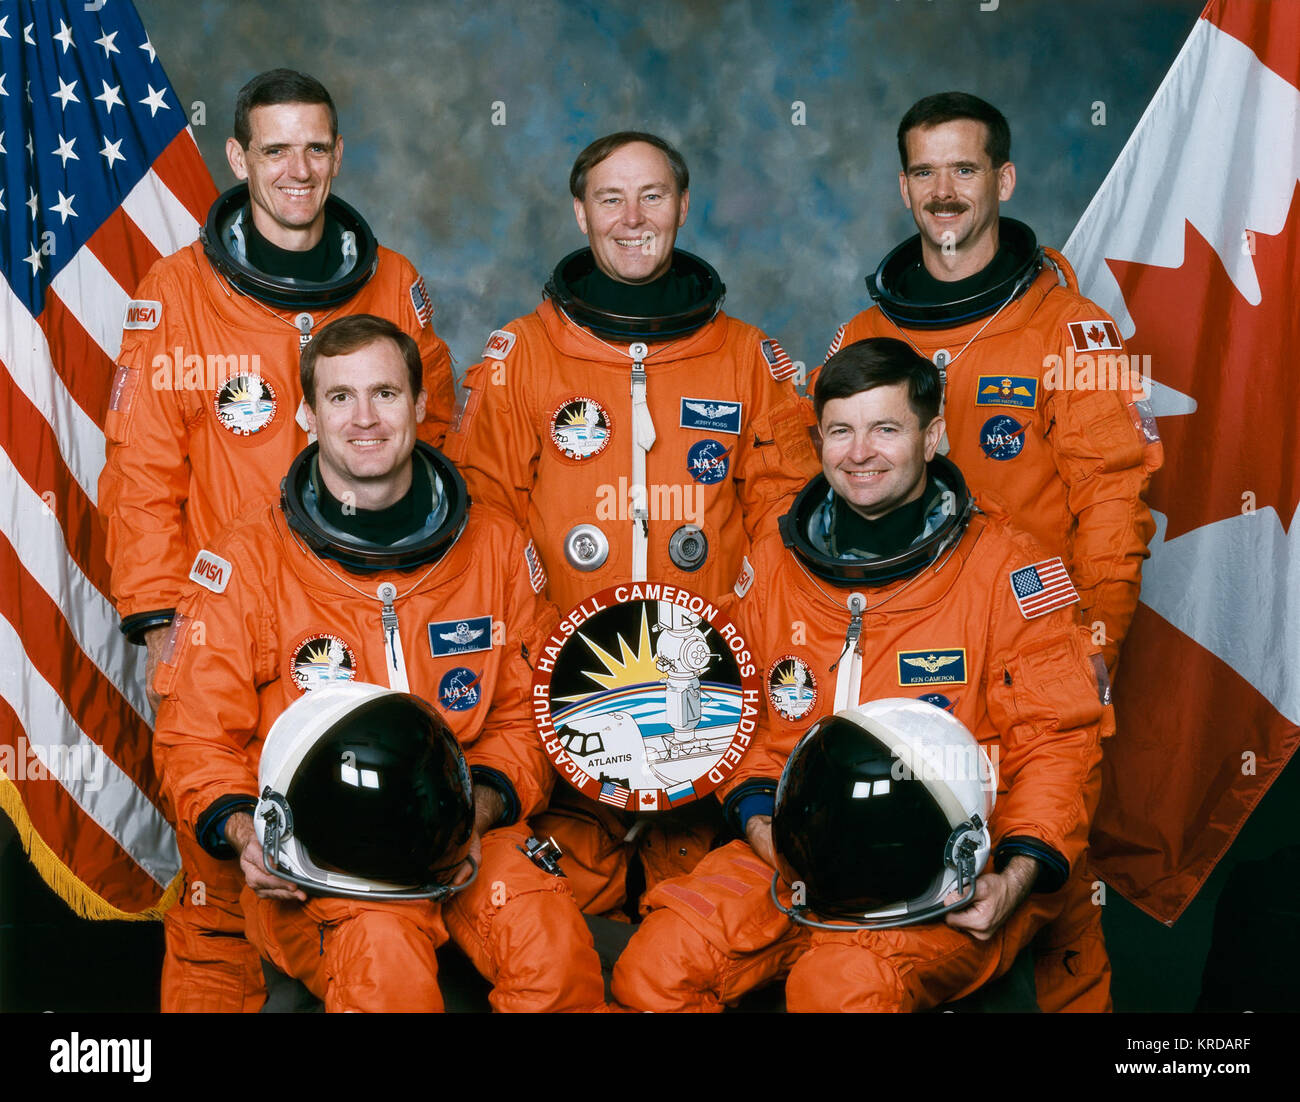 STS-74 CREW PORTRAIT: L/R SEATED: HALSELL, JIM; CAMERON, KEN. L/R STANDING: MCARTHUR, WILLIAM; ROSS, JERRY; HADFIELD, CHRIS. STS-74 crew Stock Photo